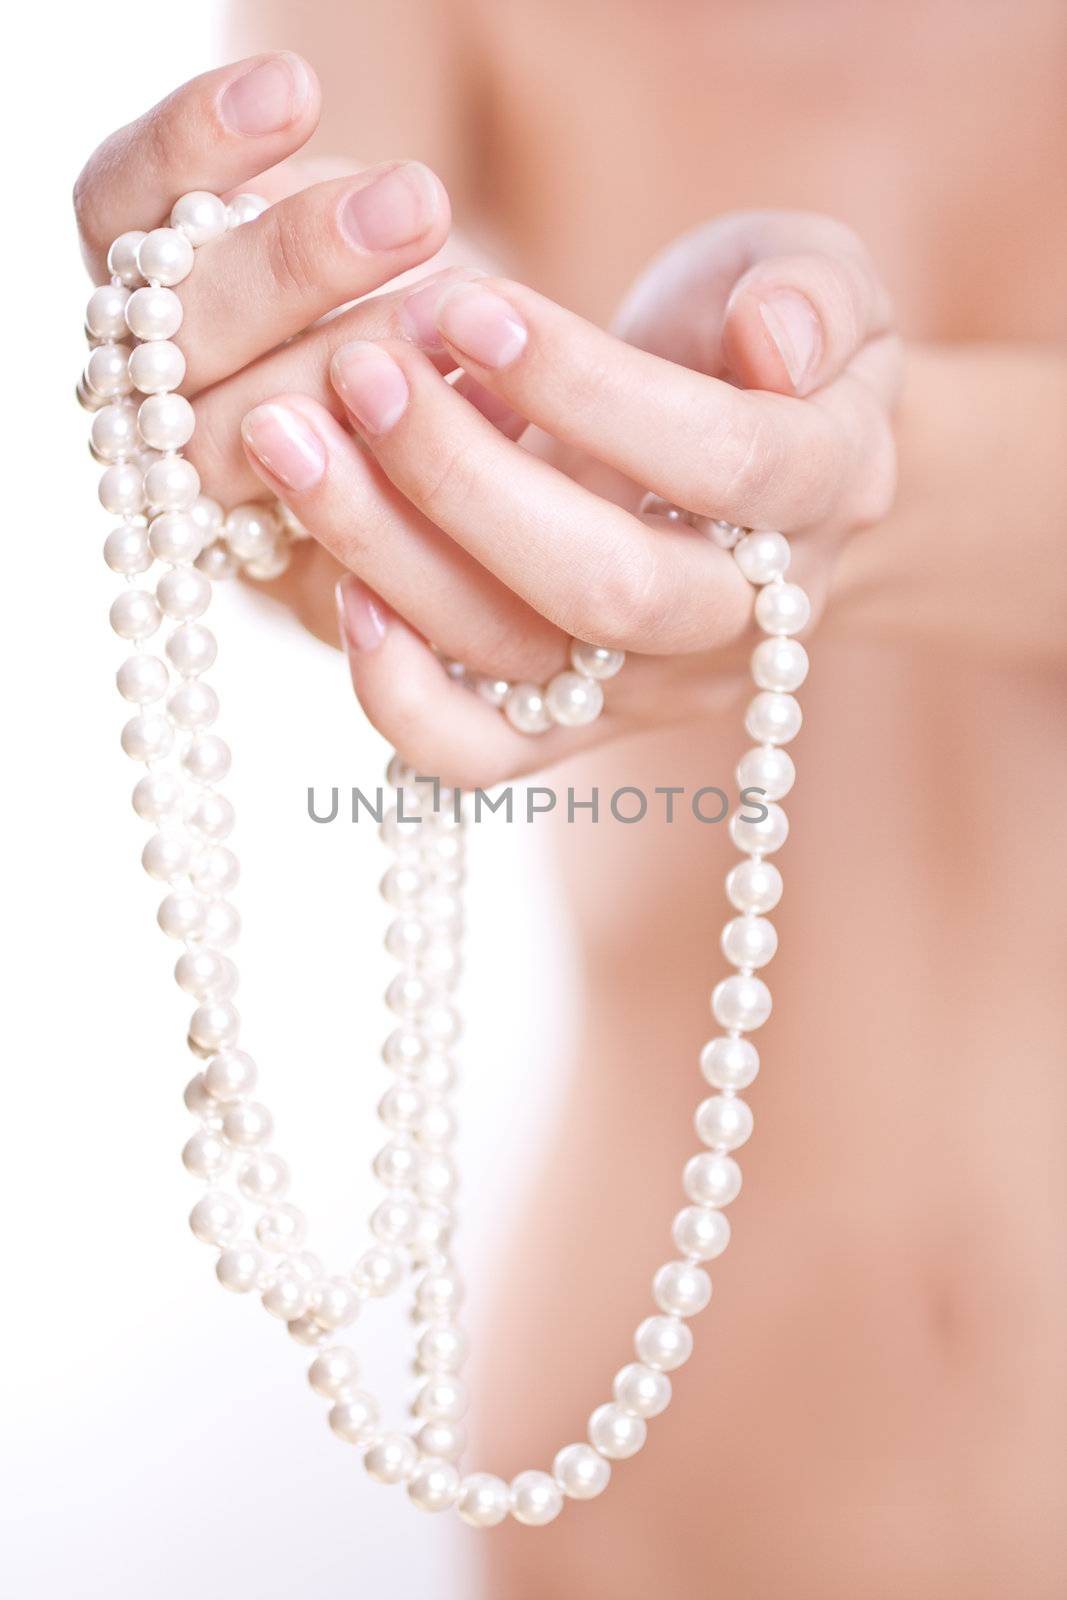 pearls in the women's hands by Lupen